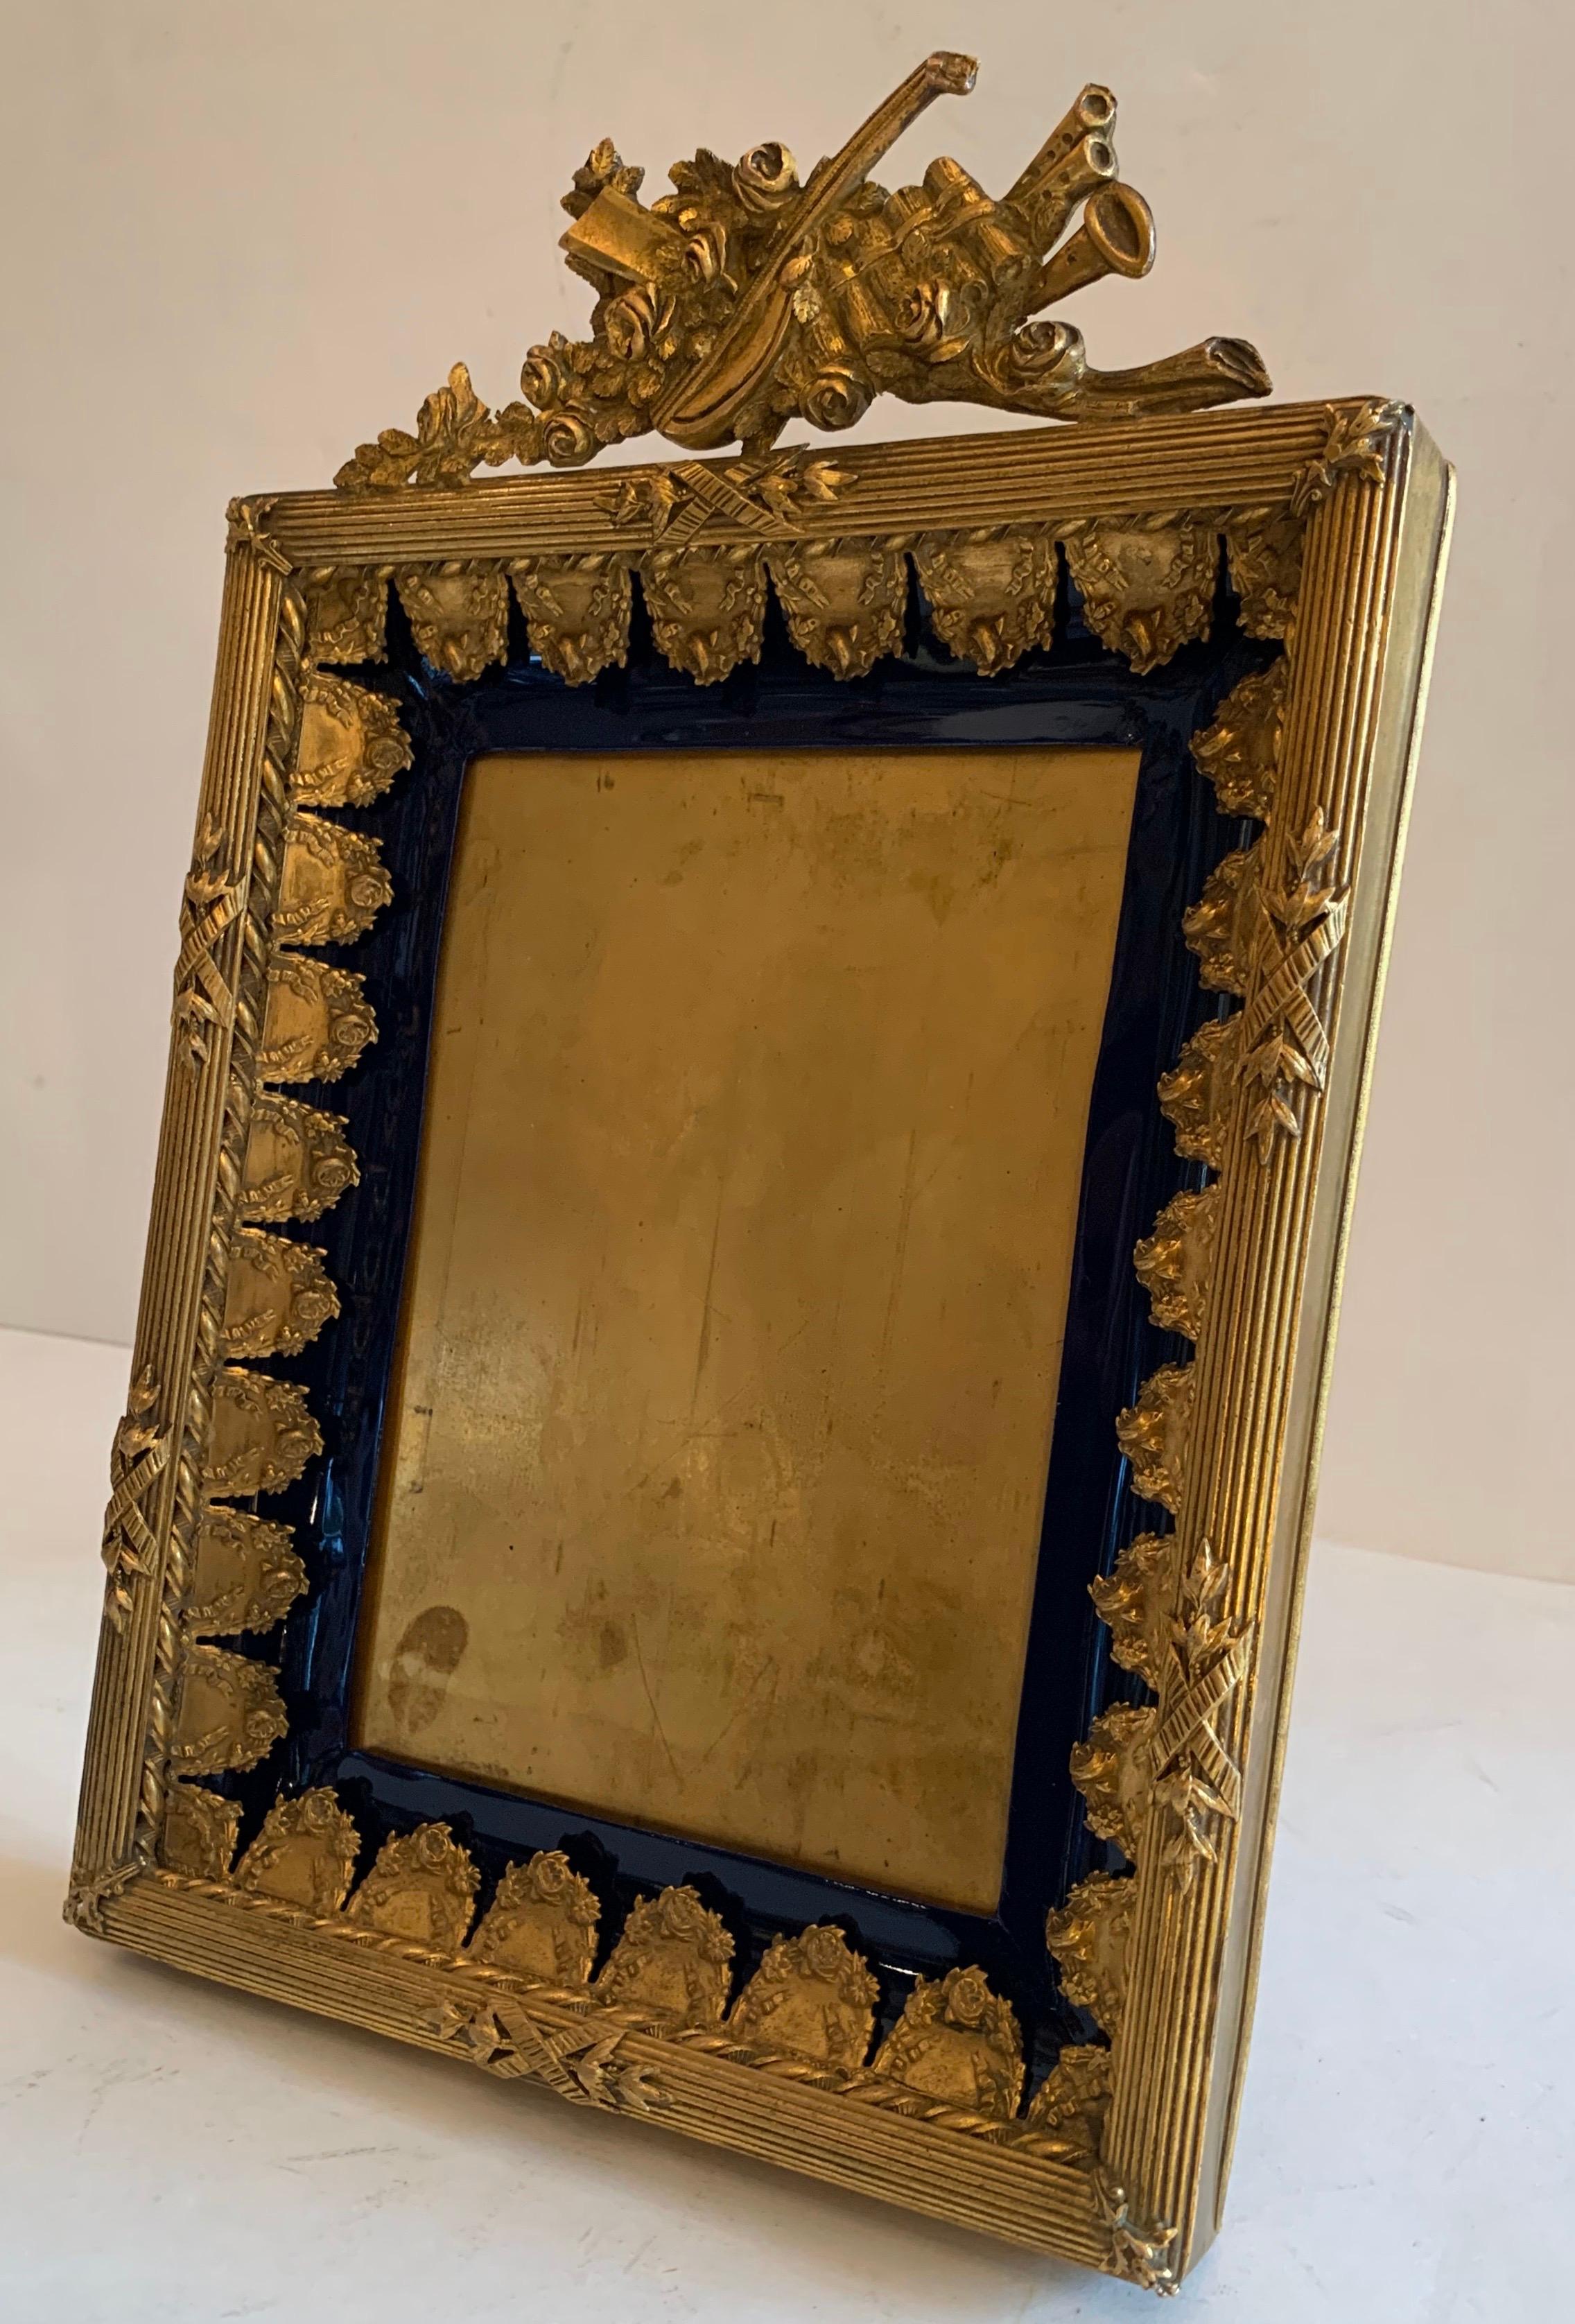 Wonderful rich Royal blue faux enamel and doré bronze French picture frame with beautifully detailed ormolu mounts on musical instruments and floral elements.

Measures: 9.5